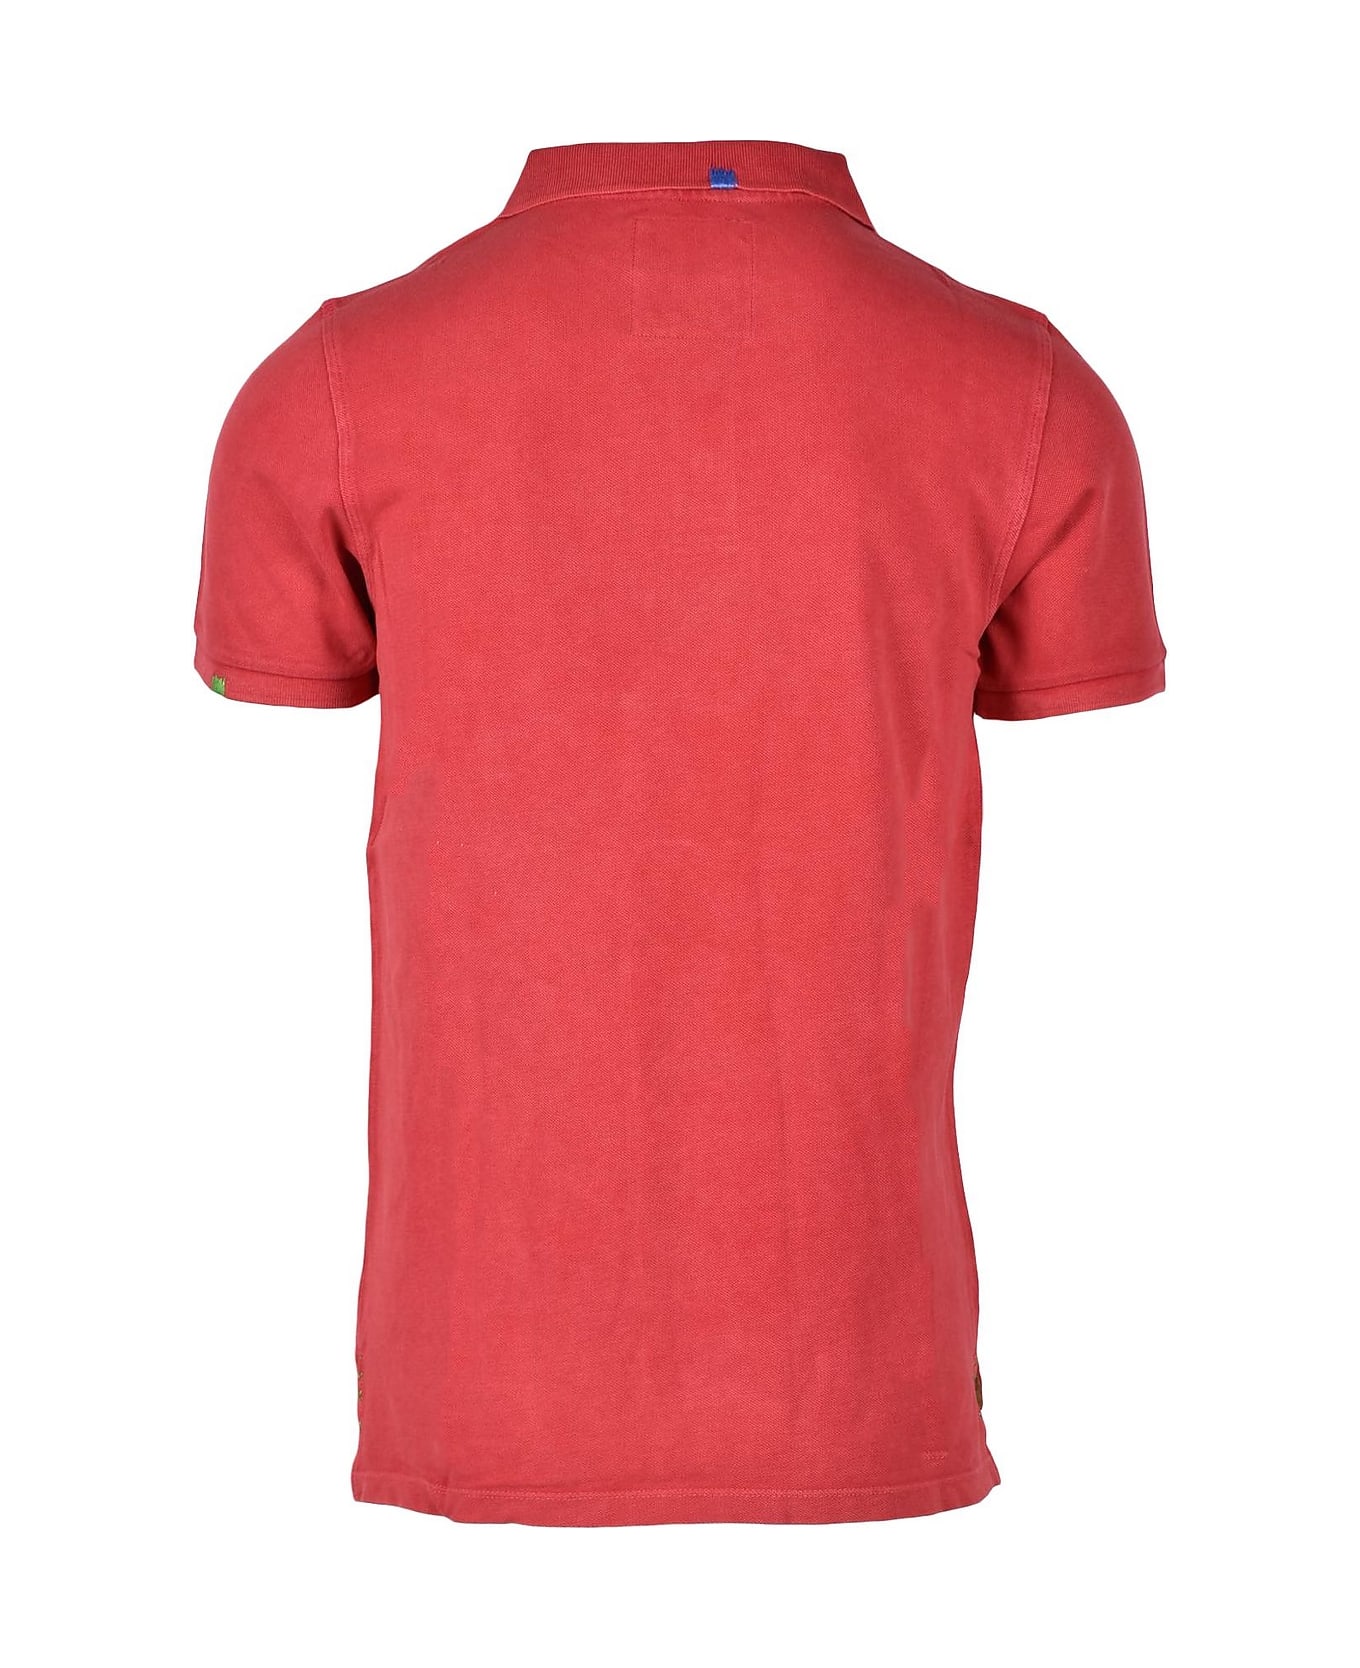 Project e Men's Red Shirt - Red